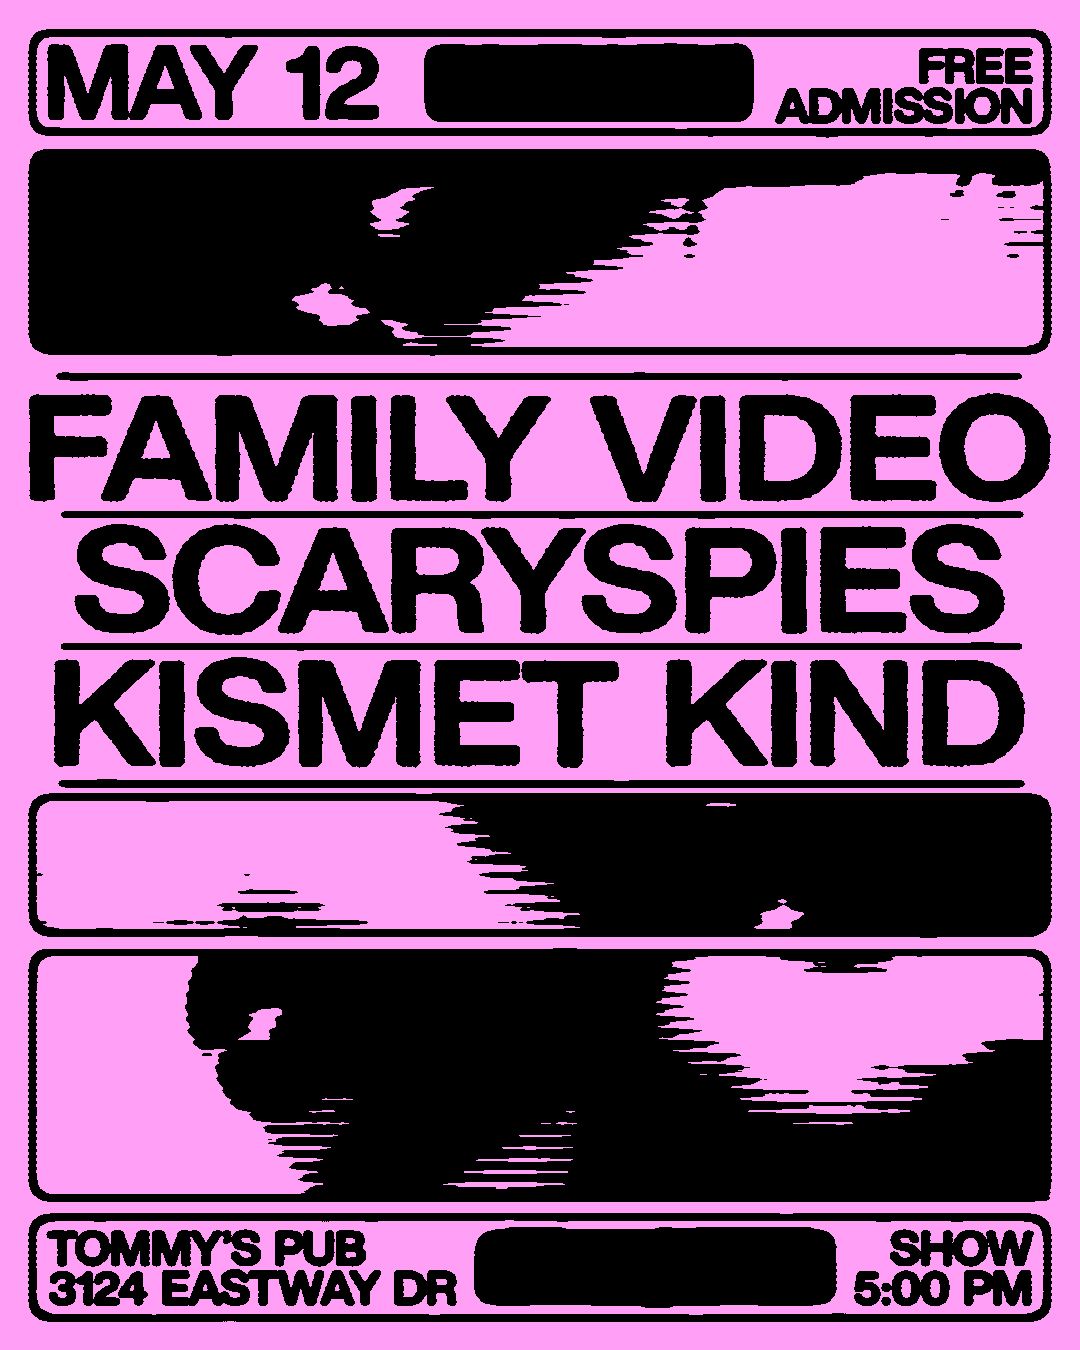 Family Video, scaryspies & Kismet Kind \/\/ May 12th at Tommy's Pub